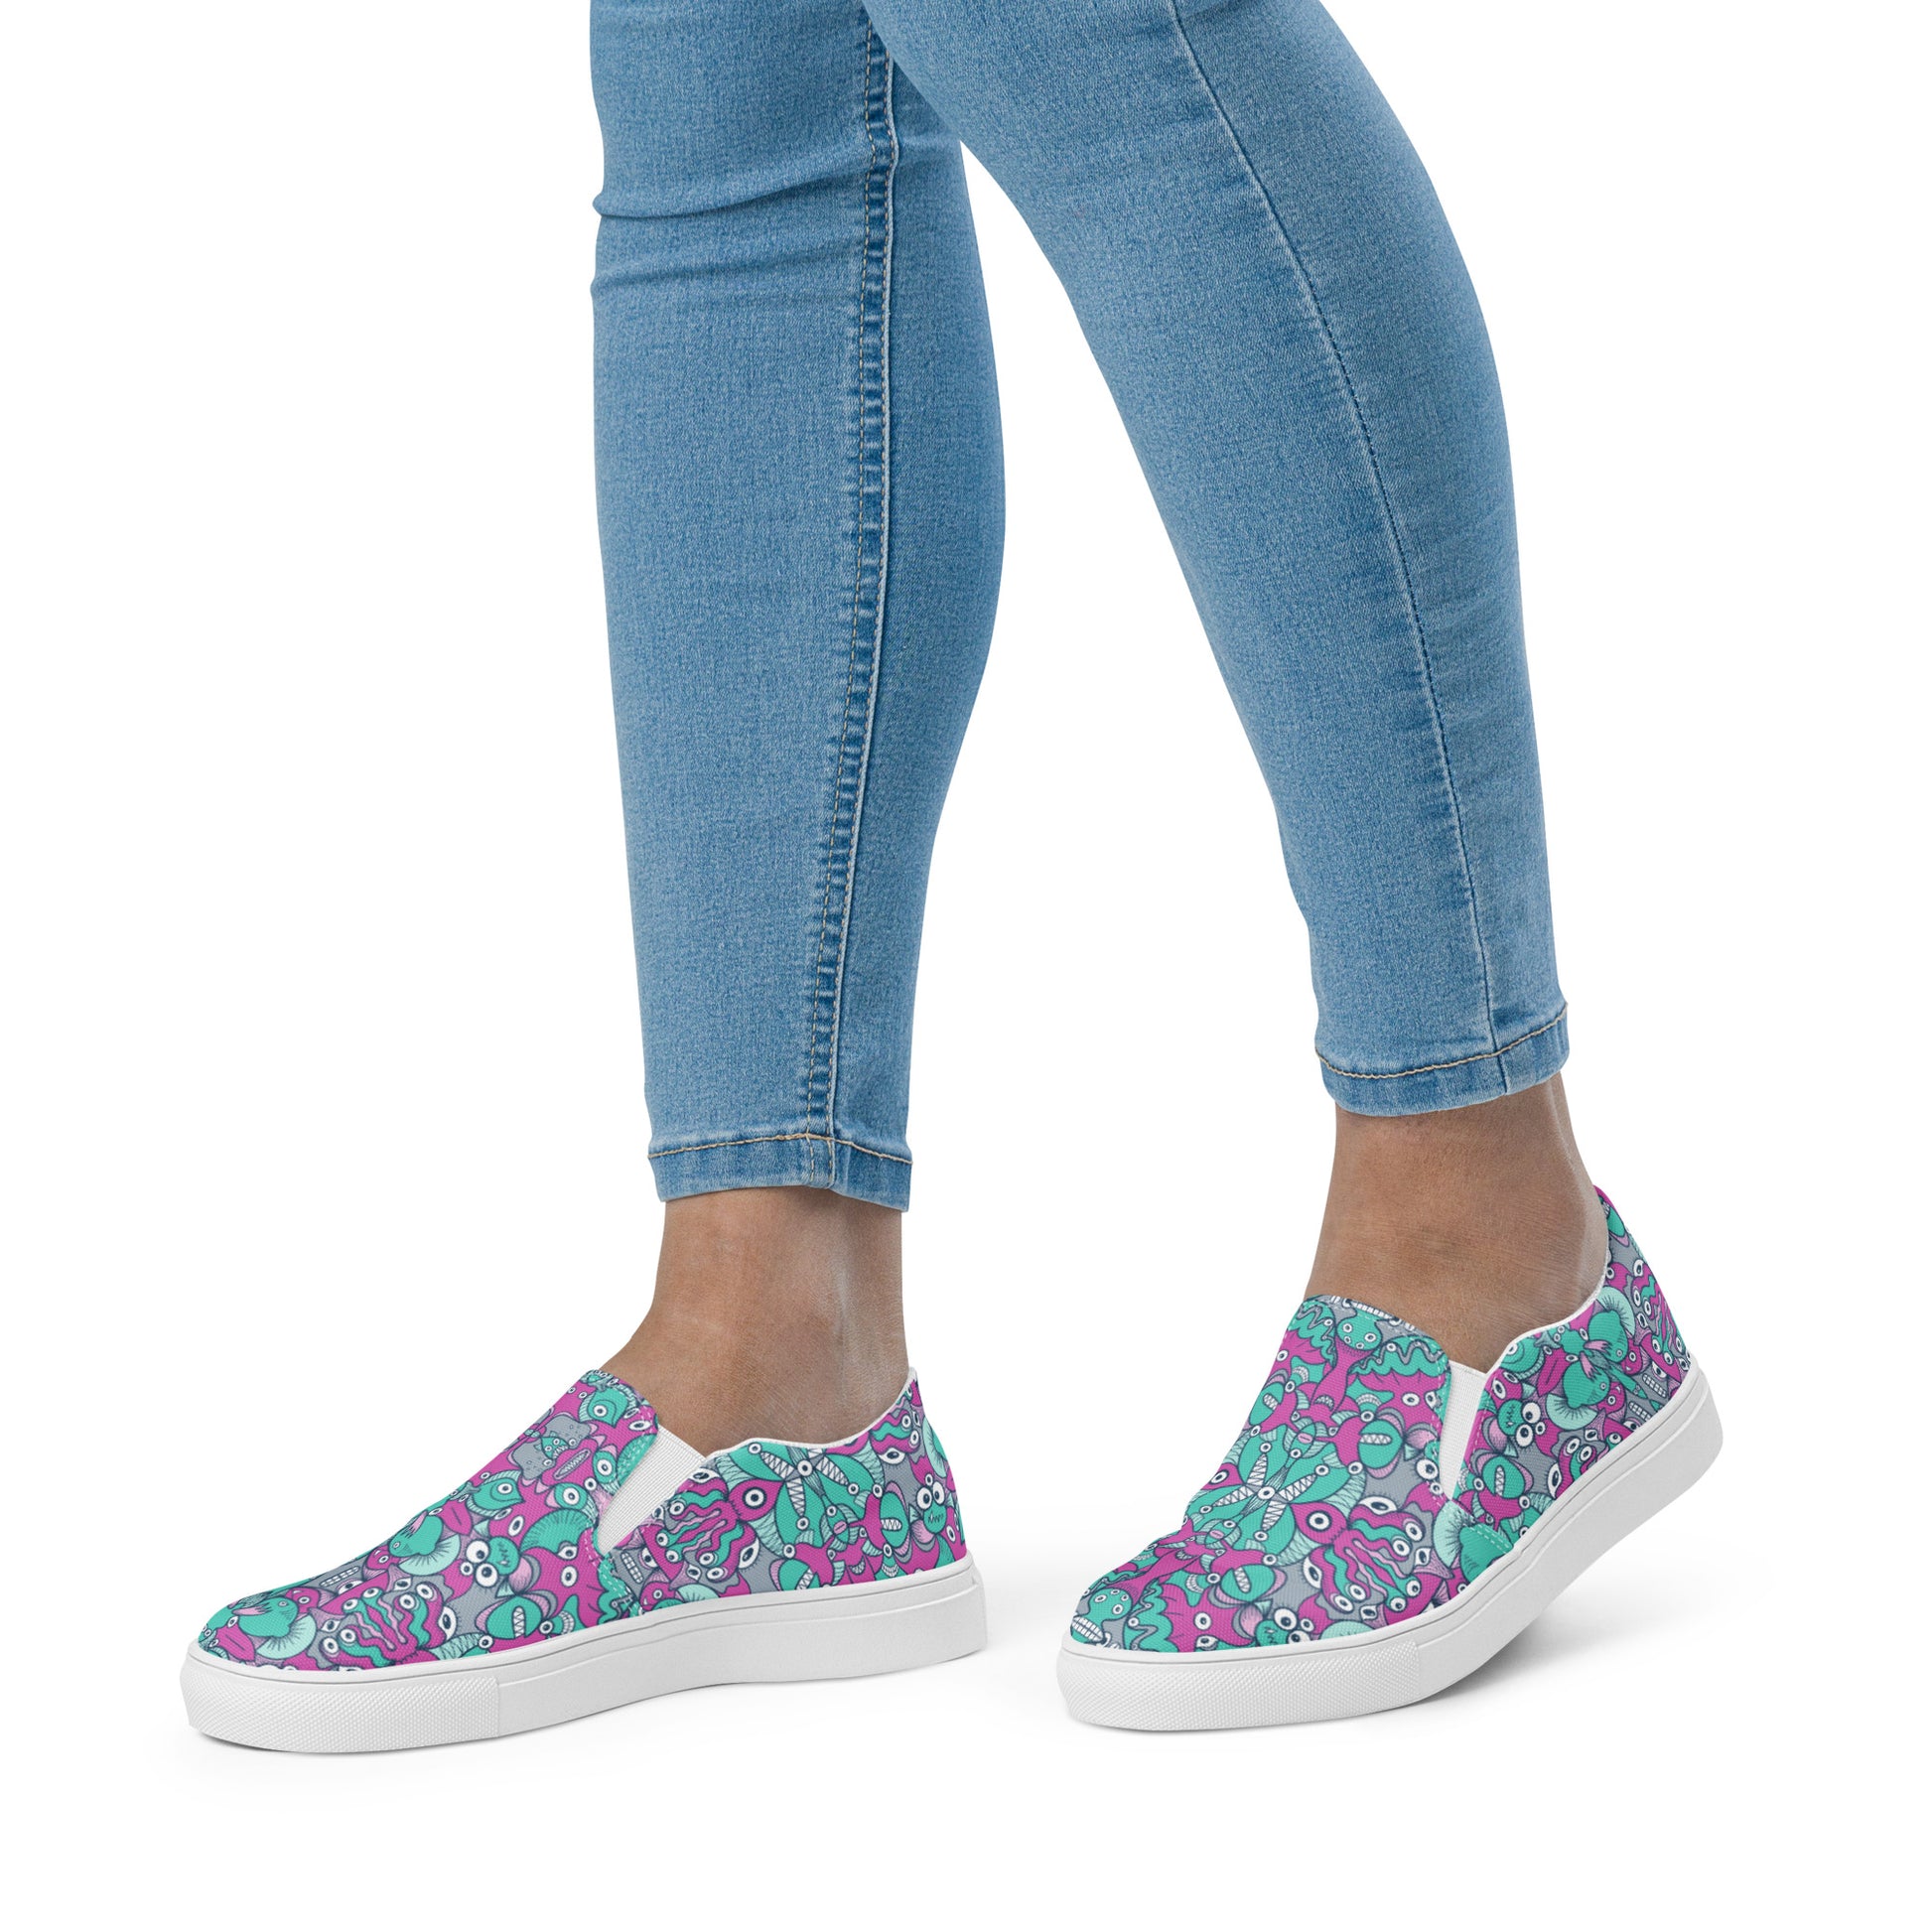 Sea creatures from an alien world Women’s slip-on canvas shoes. Lifestyle